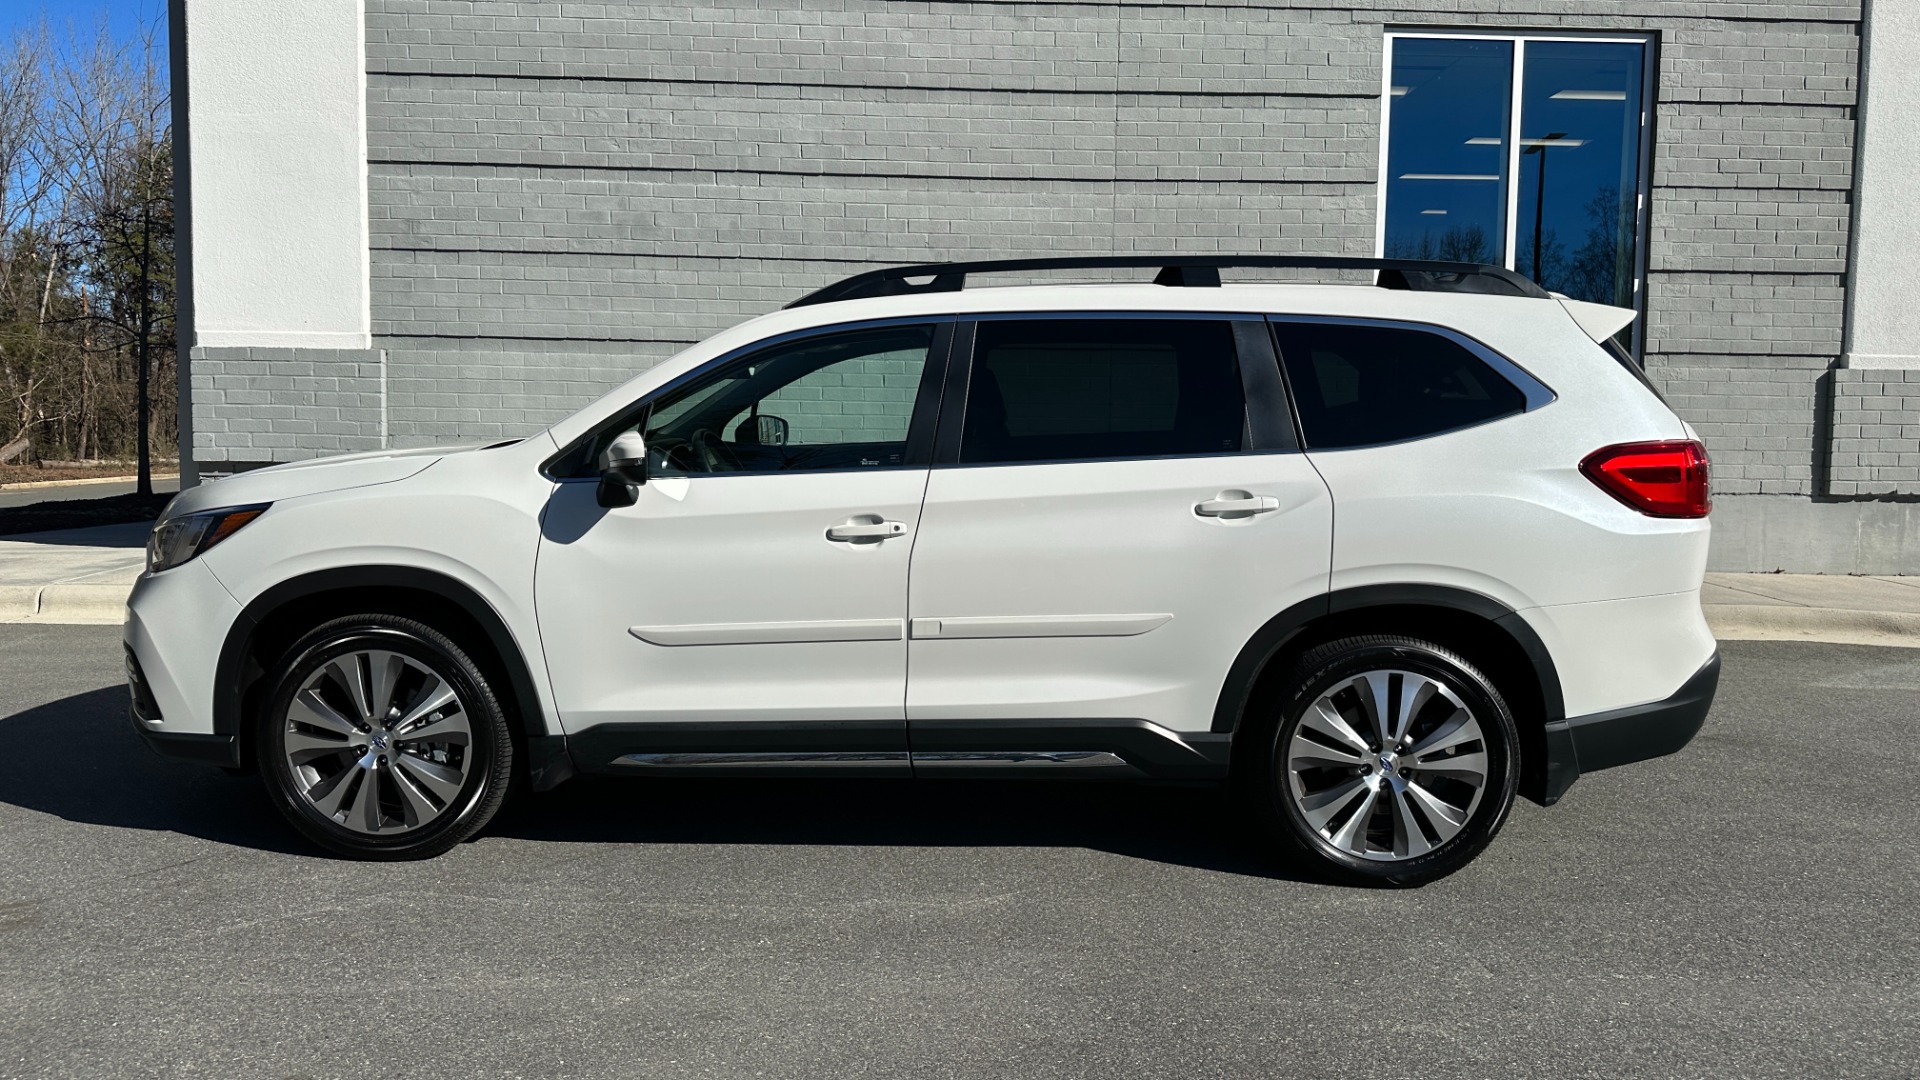 Used 2021 Subaru Ascent LIMITED / DRIVER ASSISTANCE / NAVIGATION / PANORAMIC ROOF / LEATHER for sale $36,995 at Formula Imports in Charlotte NC 28227 6